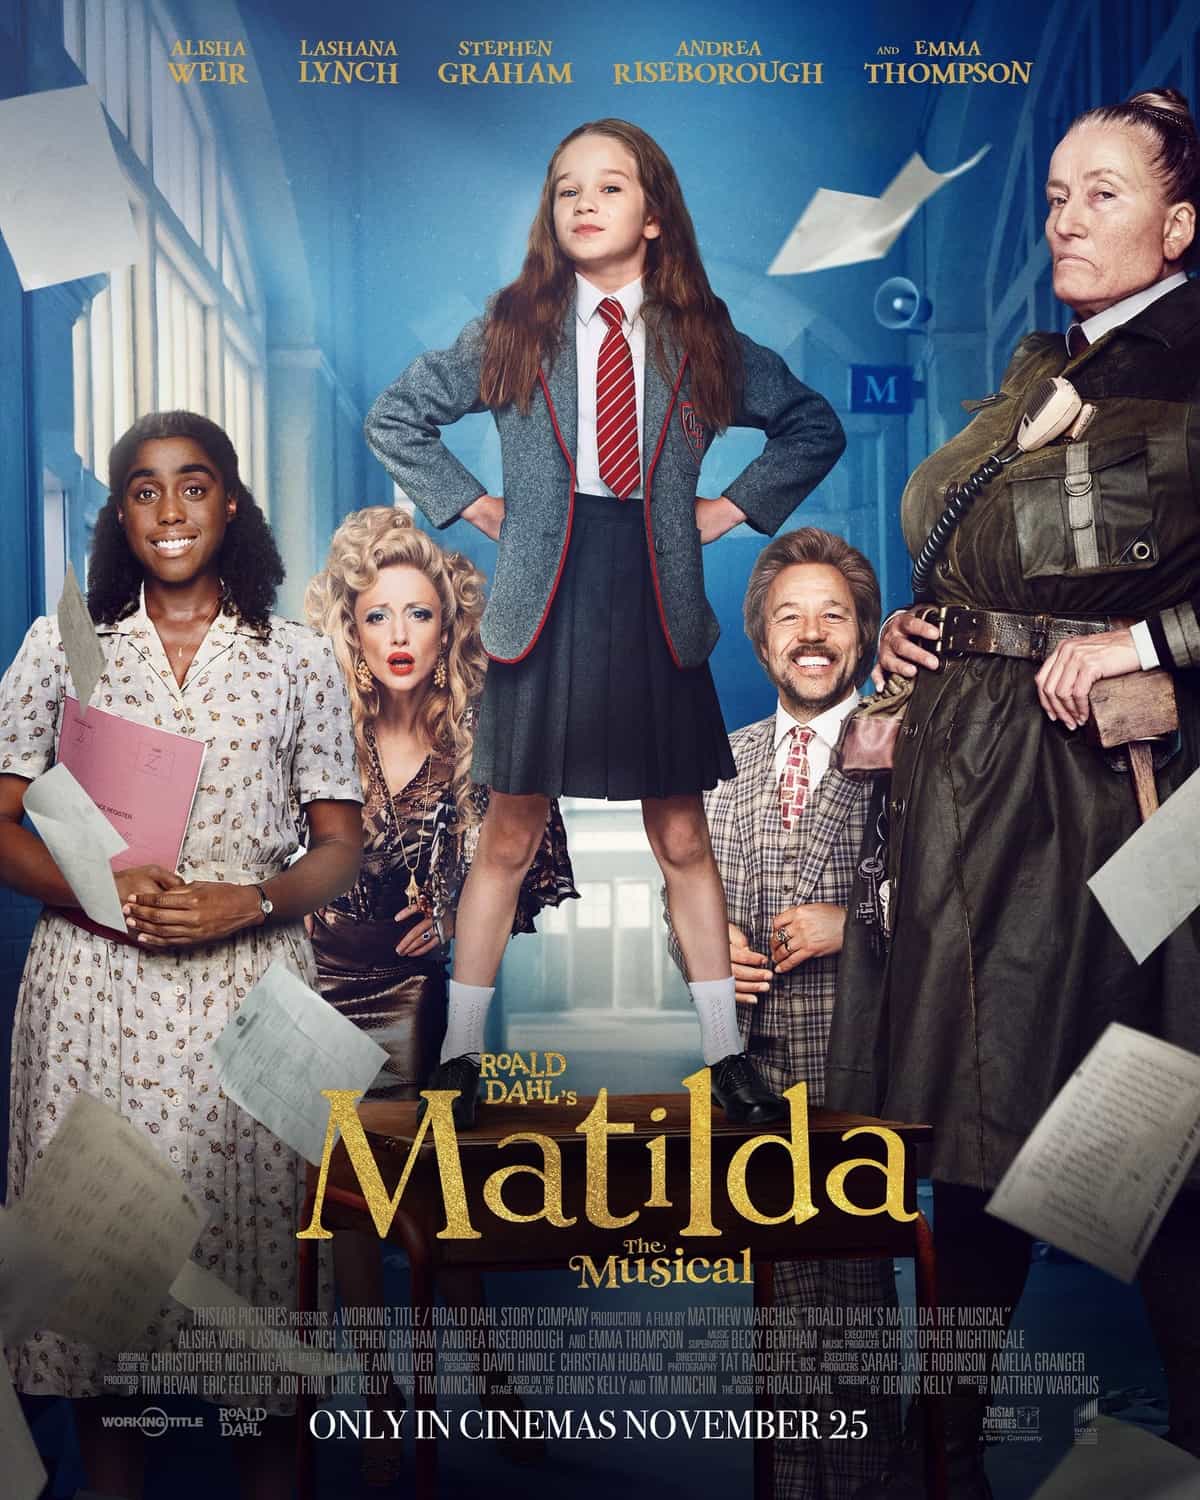 Matilda The Musical is given a PG age rating in the UK for mild threat, comic violence